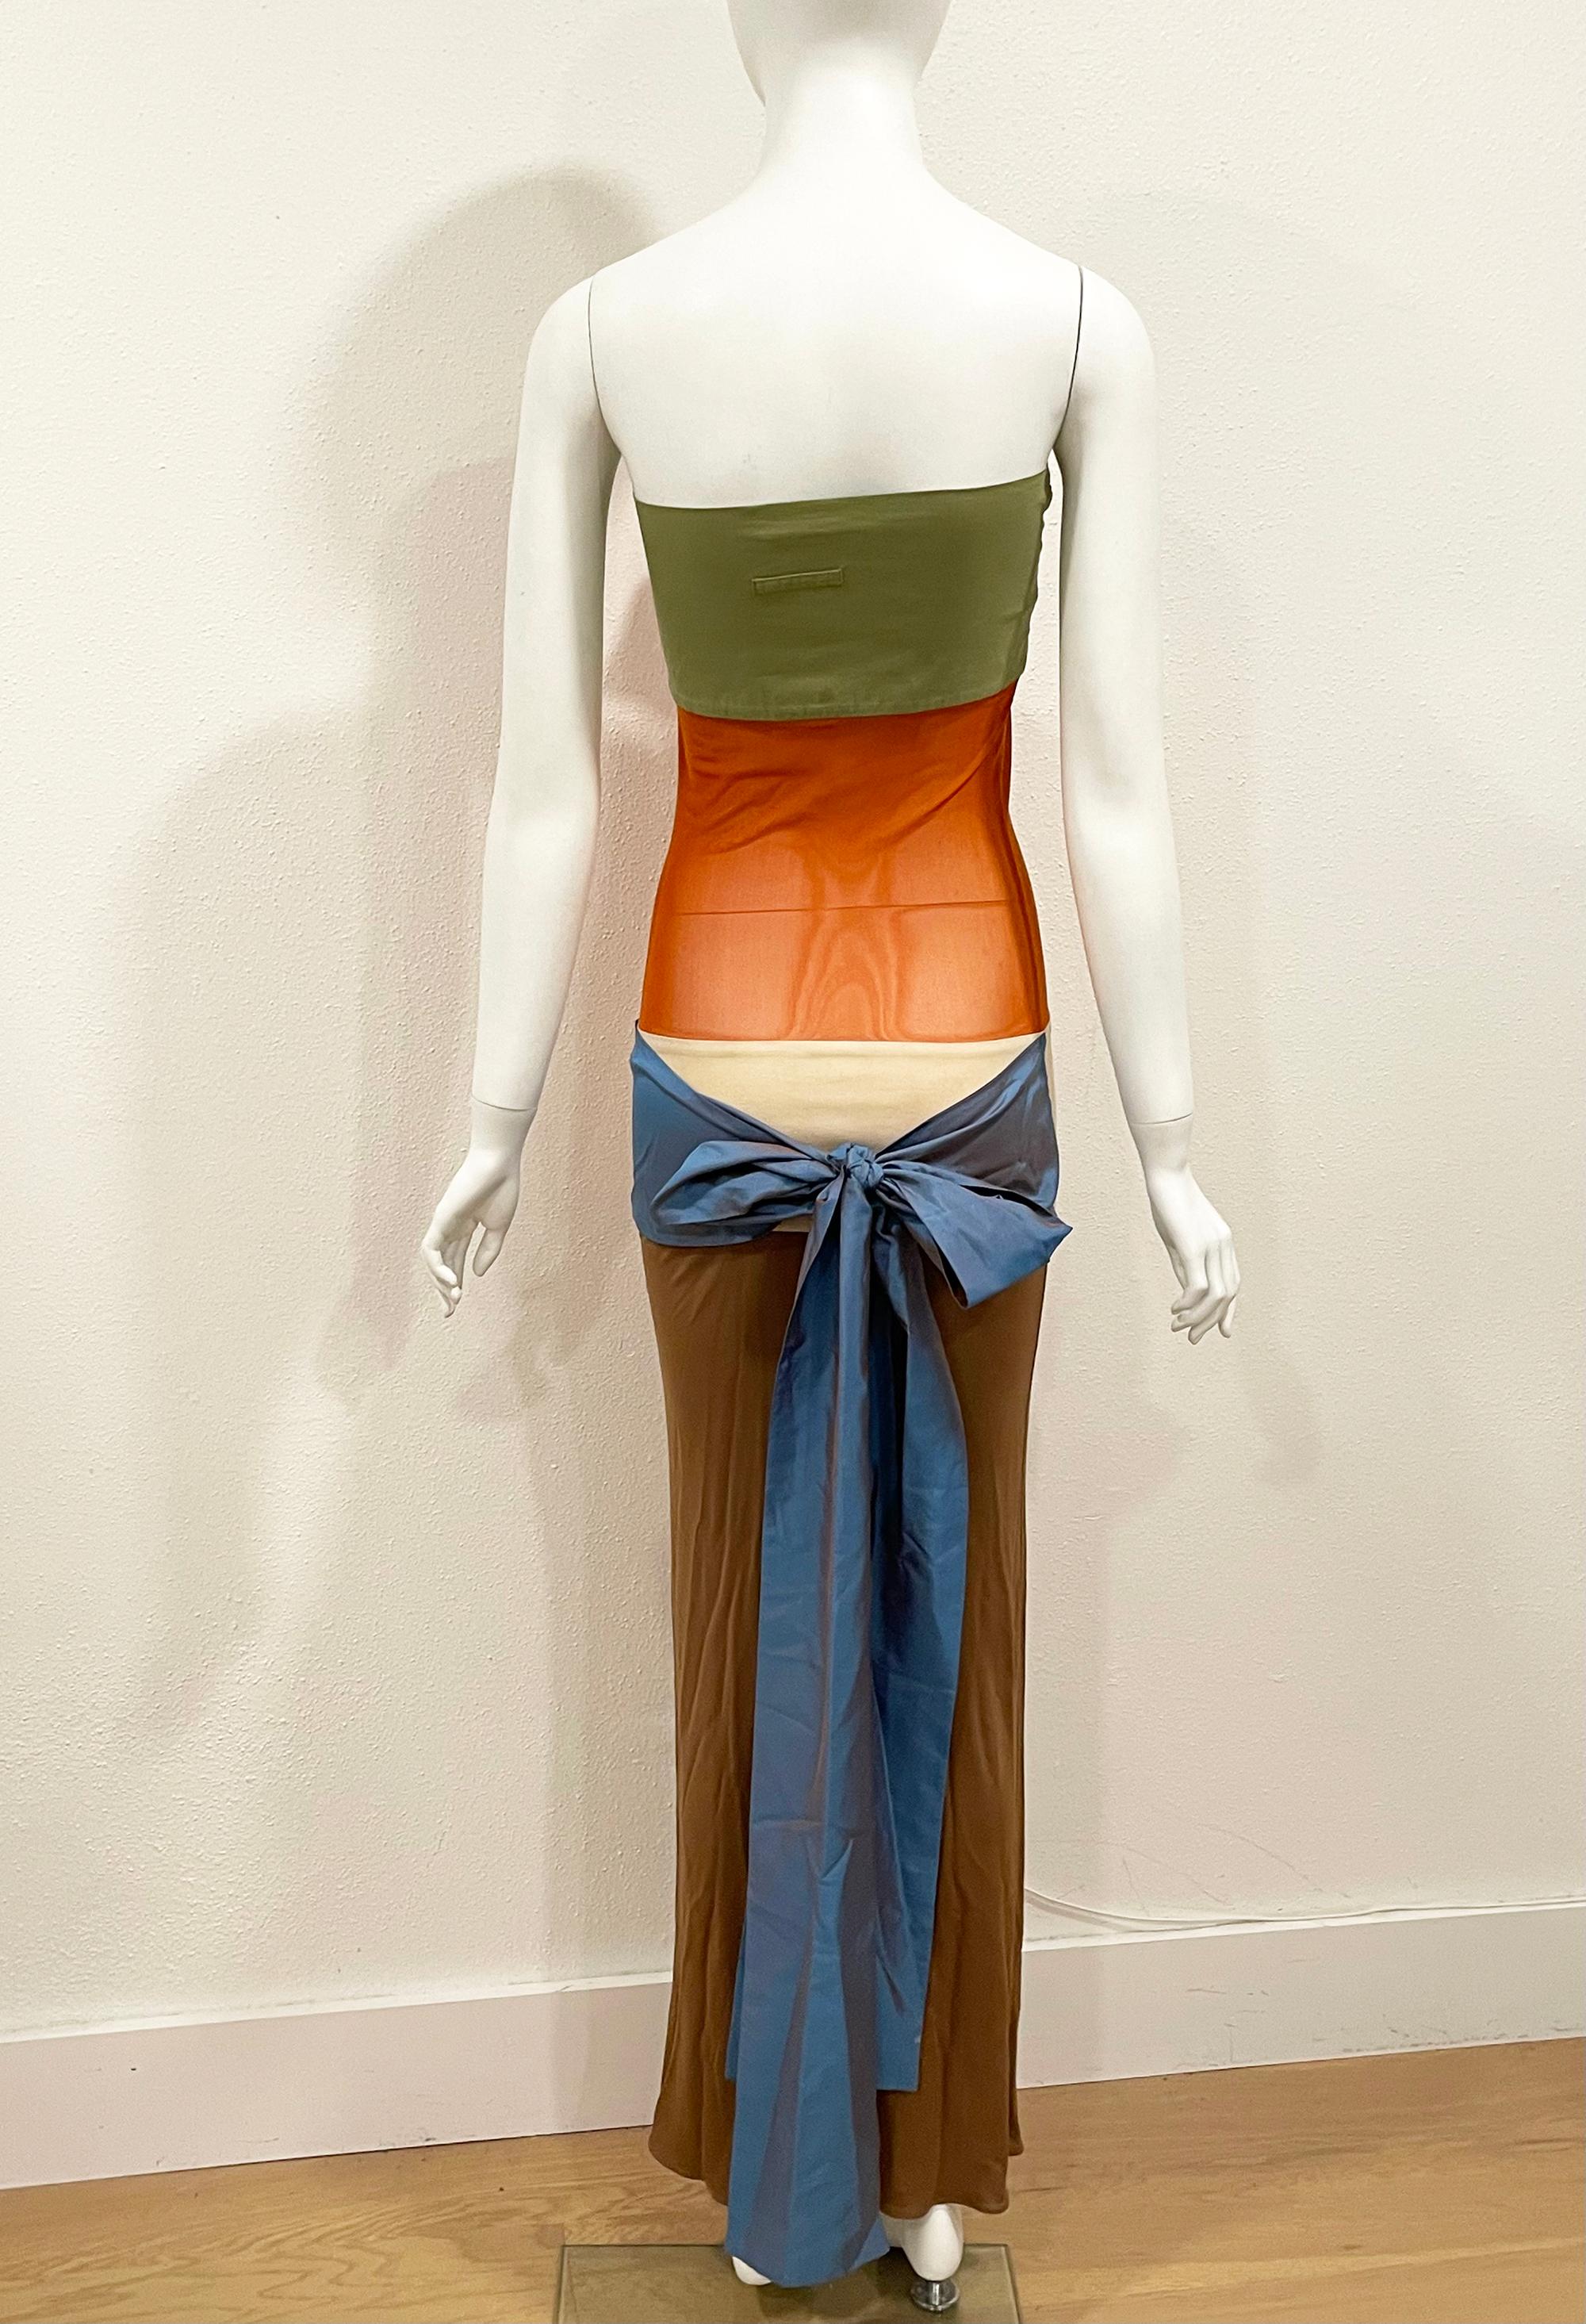 1990s JEAN PAUL GAULTIER stretch Bow Dress

Sheer panel at middle
Ribbons can be tied front or back
Condition: Very good
rayon and silk ribbons
30